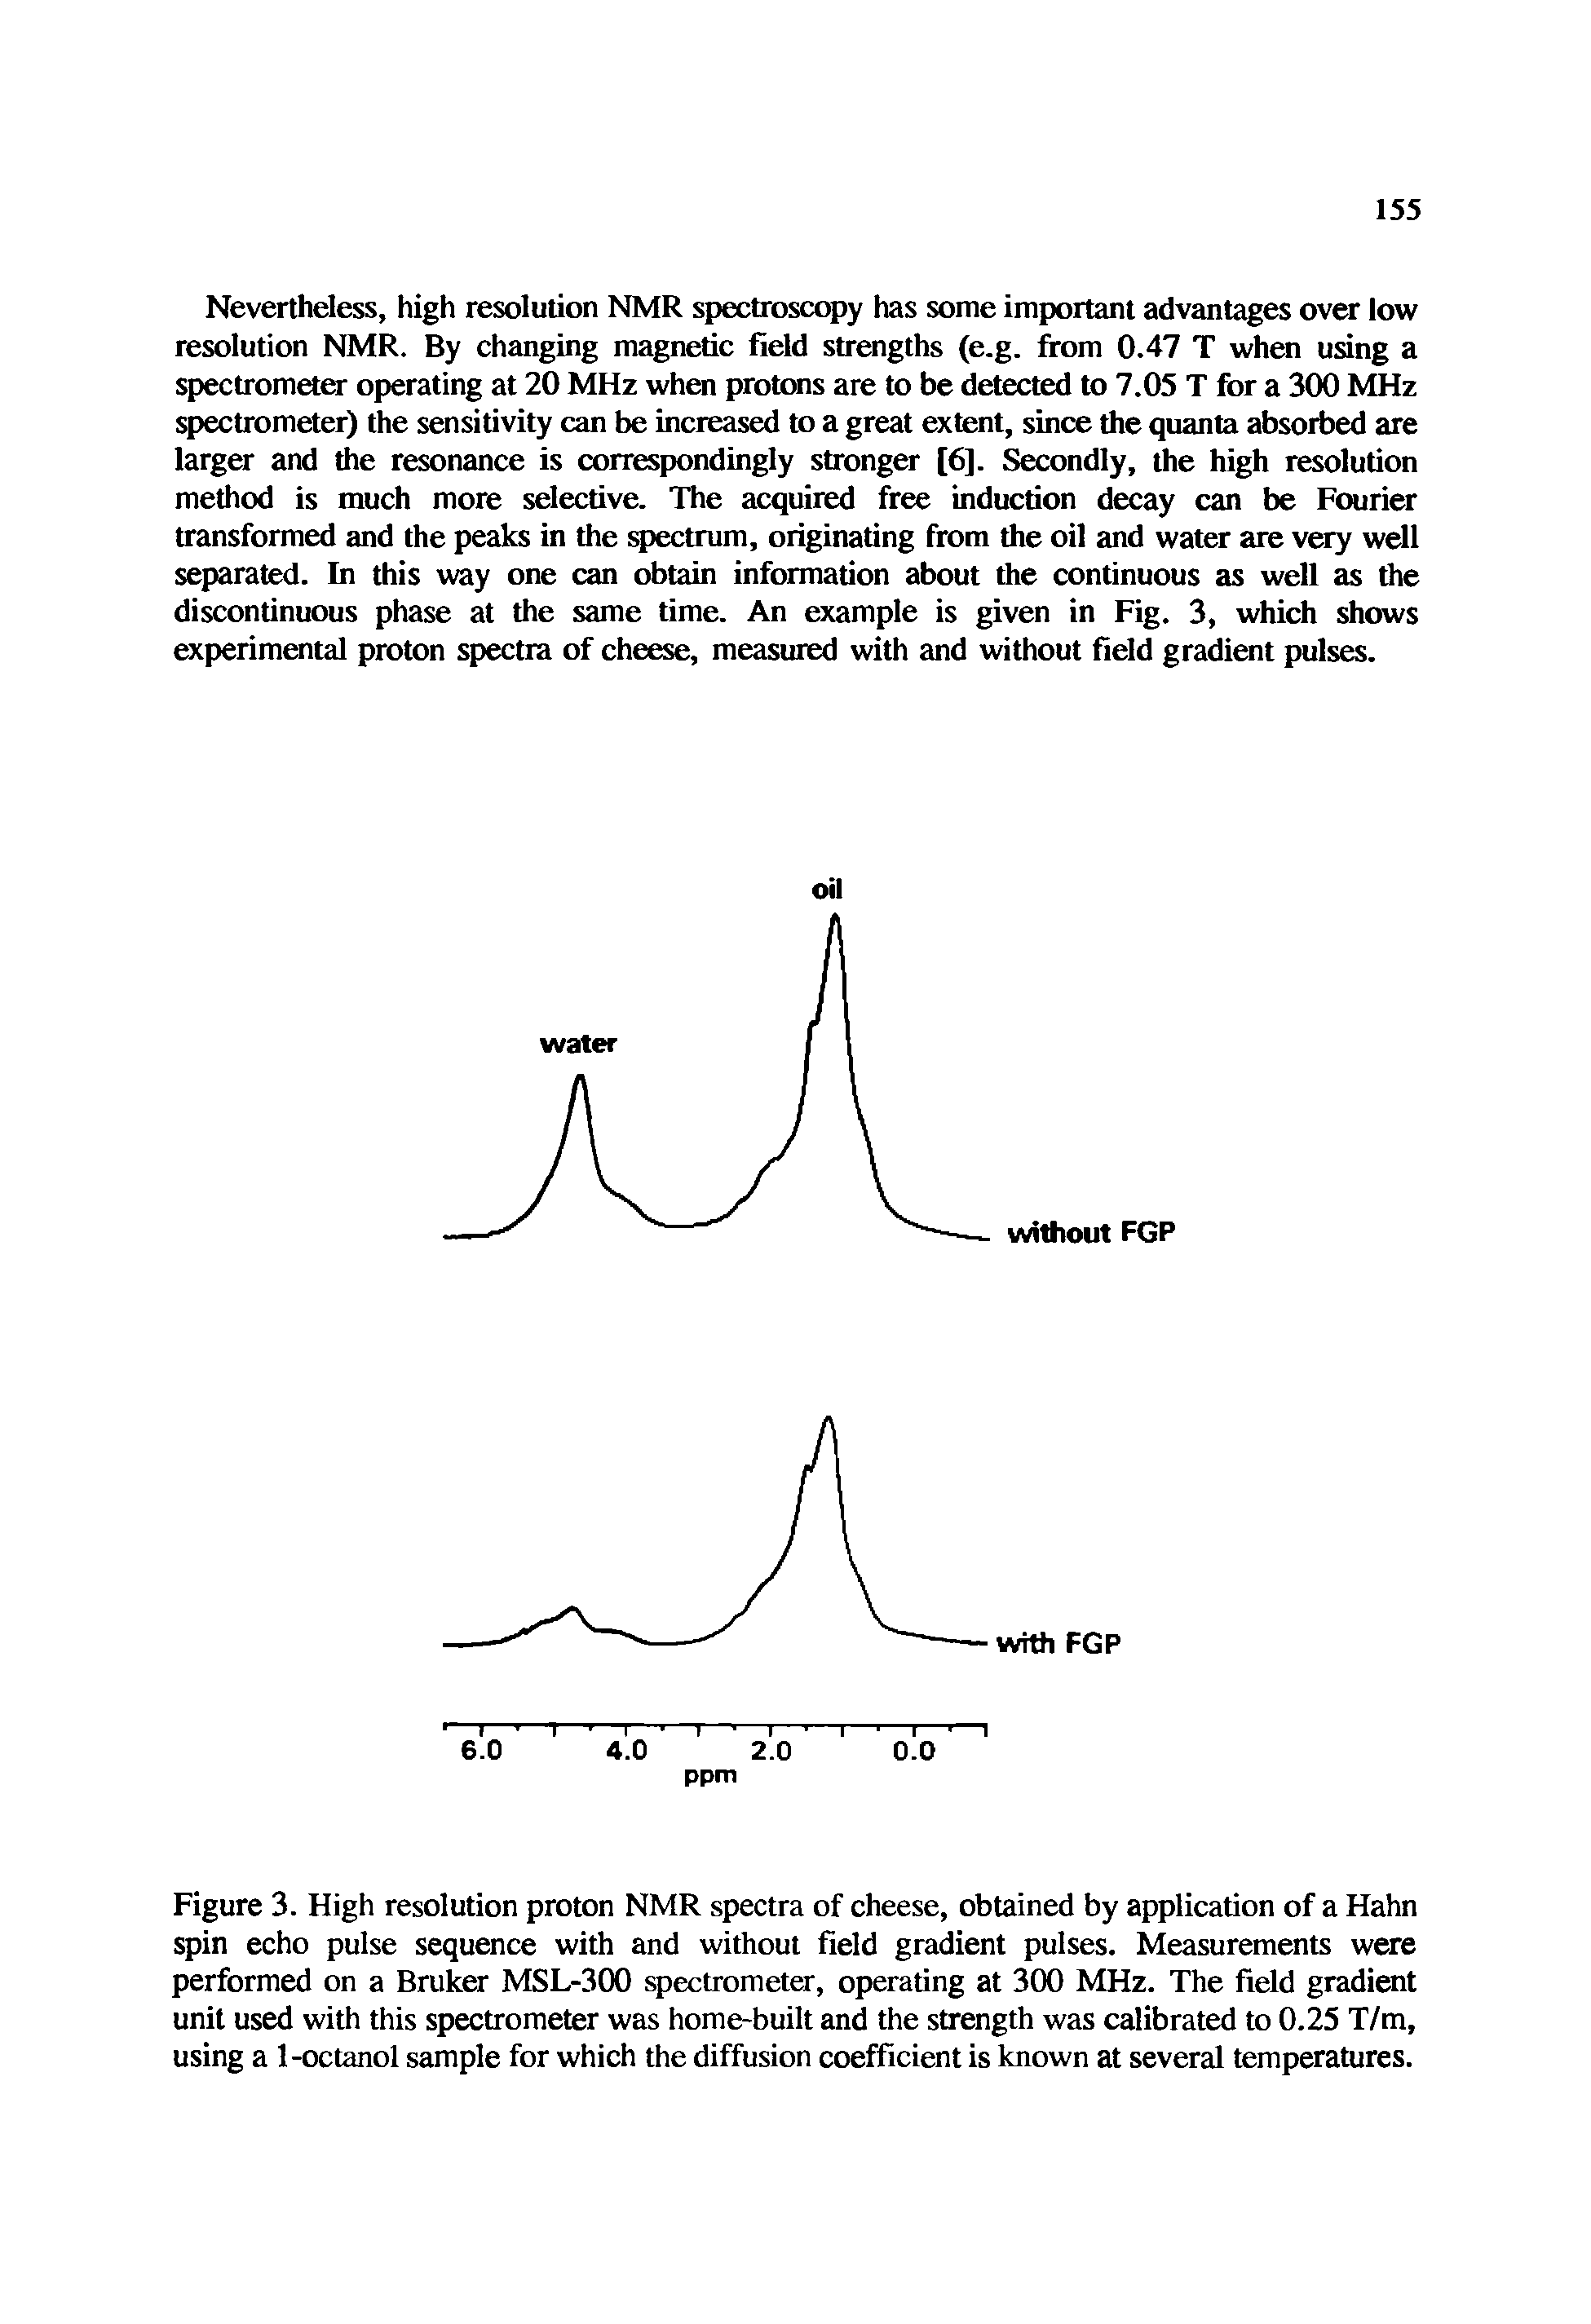 Figure 3. High resolution proton NMR spectra of cheese, obtained by application of a Hahn spin echo pulse sequence with and without field gradient pulses. Measurements were performed on a Bruker MSL-300 spectrometer, operating at 300 MHz. The field gradient unit used with this spectrometer was home-built and the strength was calibrated to 0.25 T/m, using a 1-octanol sample for which the diffusion coefficient is known at several temperatures.